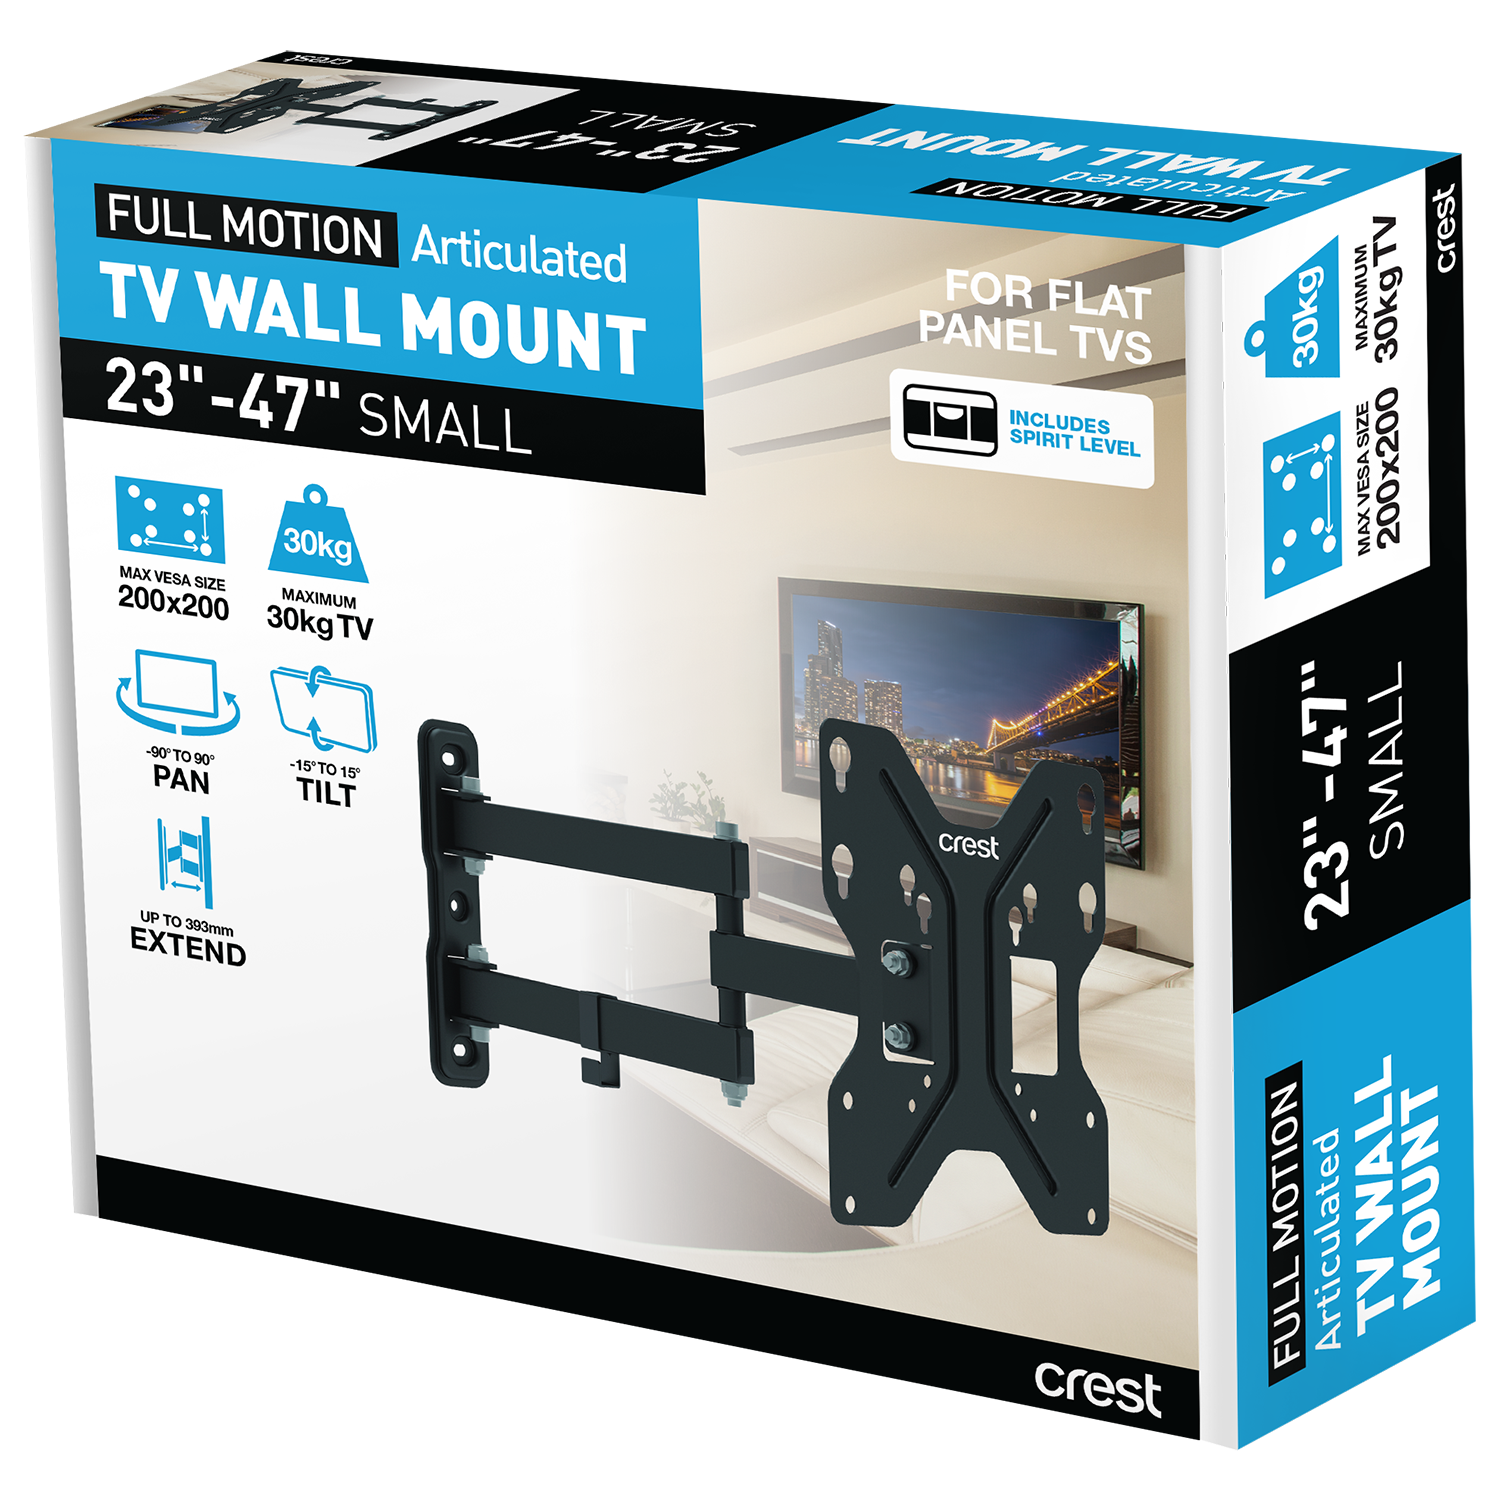 Full Motion TV Wall Mount Articulated - 23" - 47"